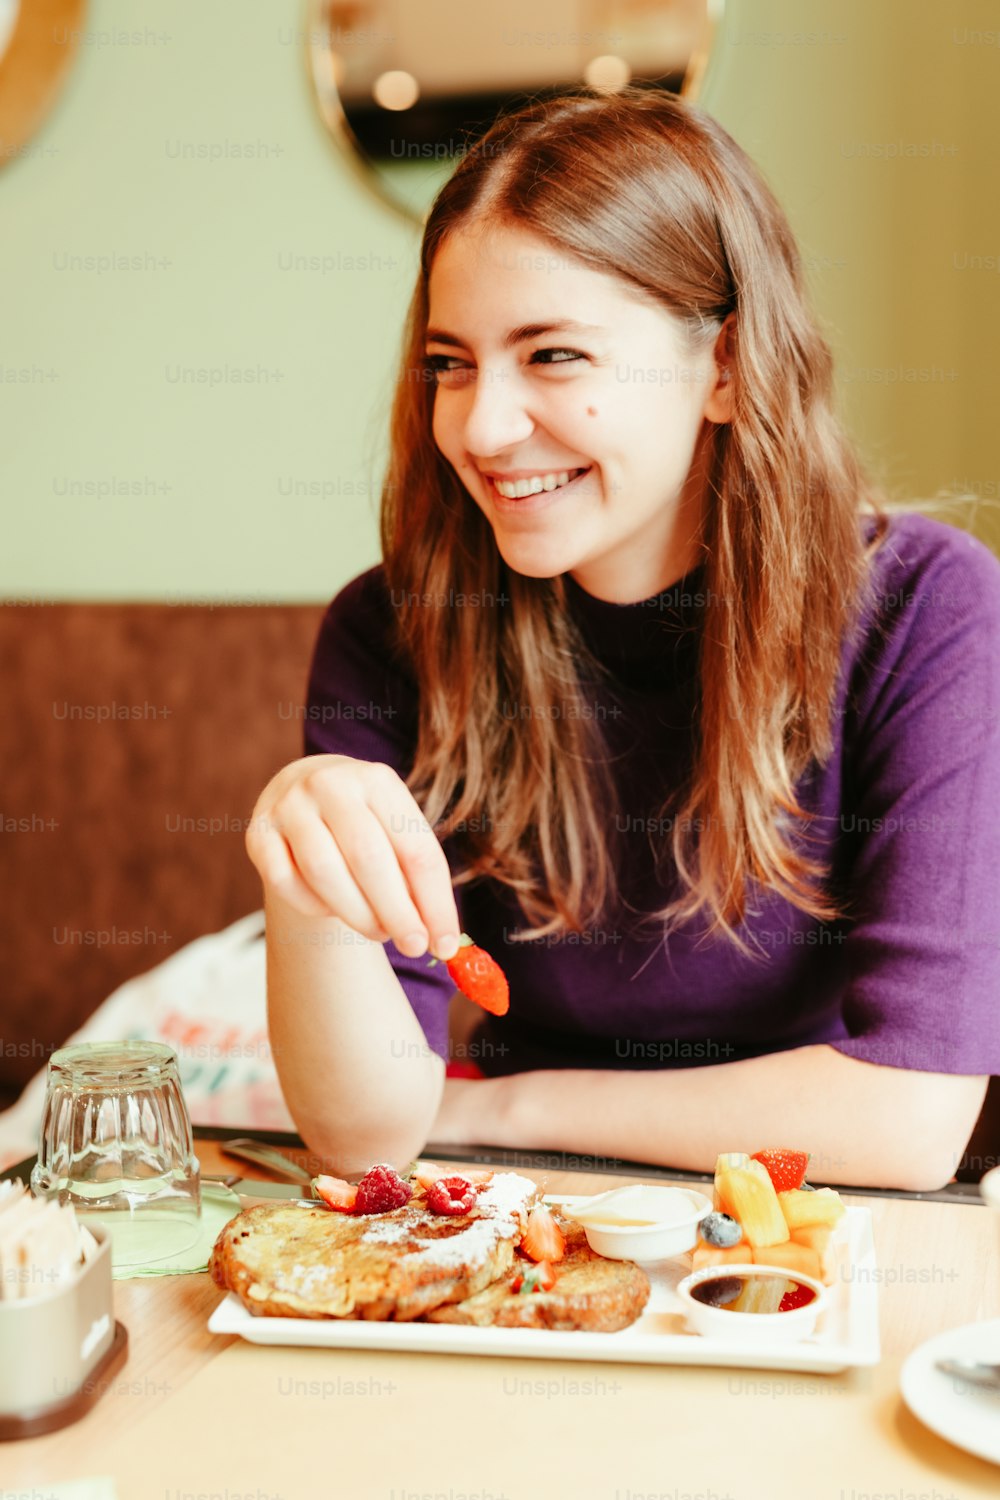 a woman sitting at a table with a plate of food